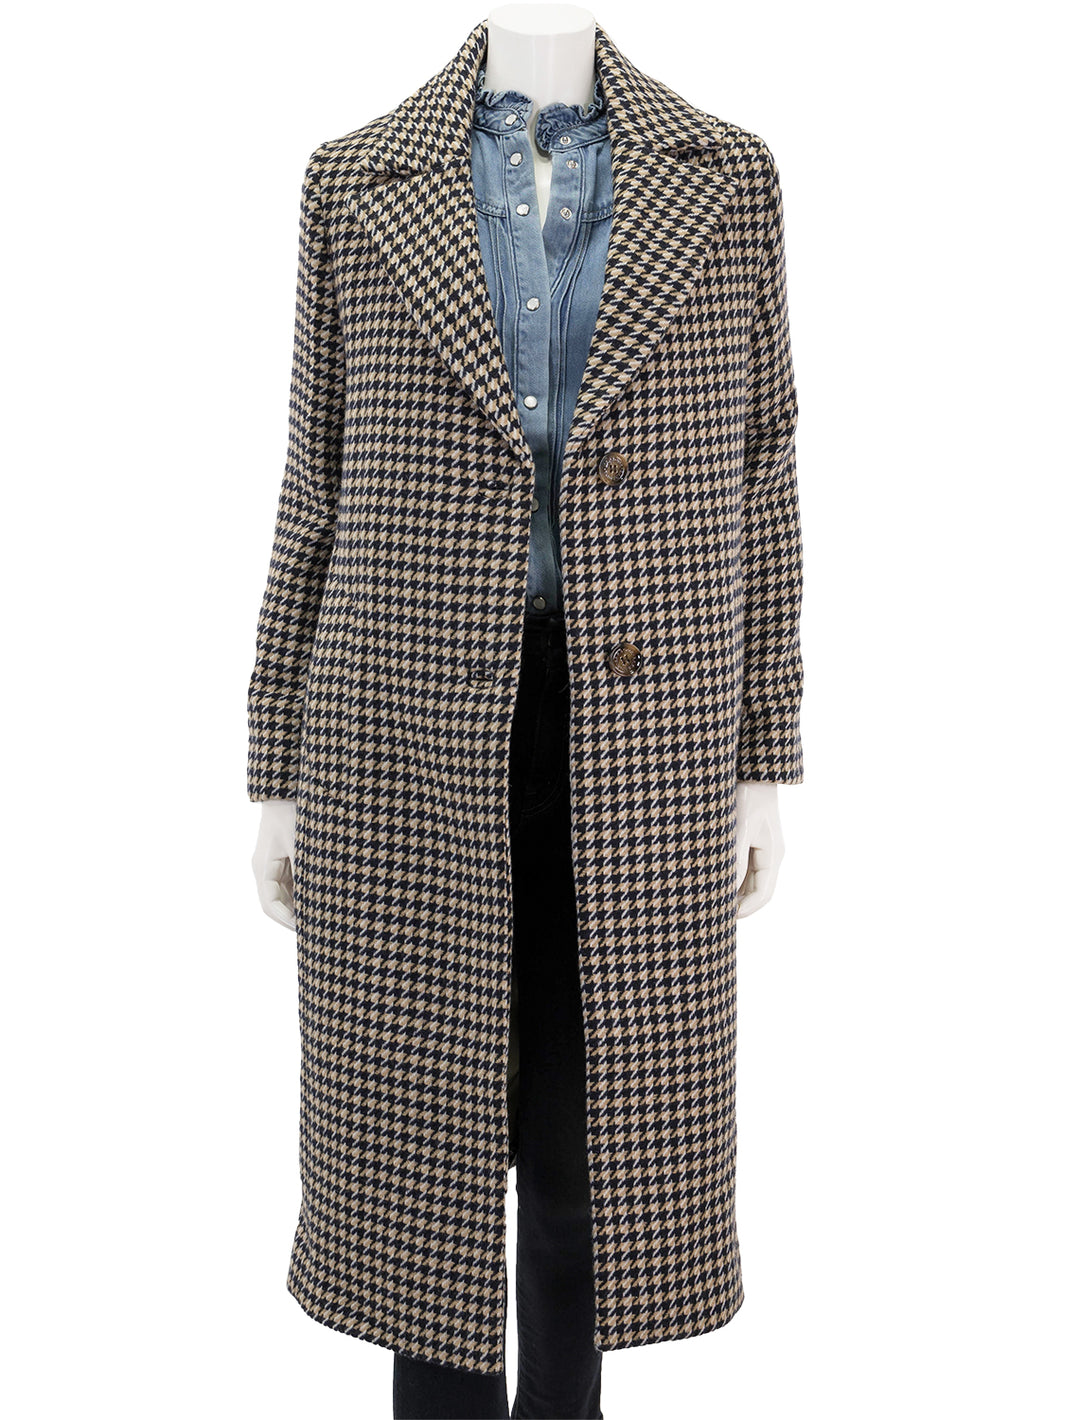 Front view of Barbour's houndstooth angelina wool coat, unbuttoned.